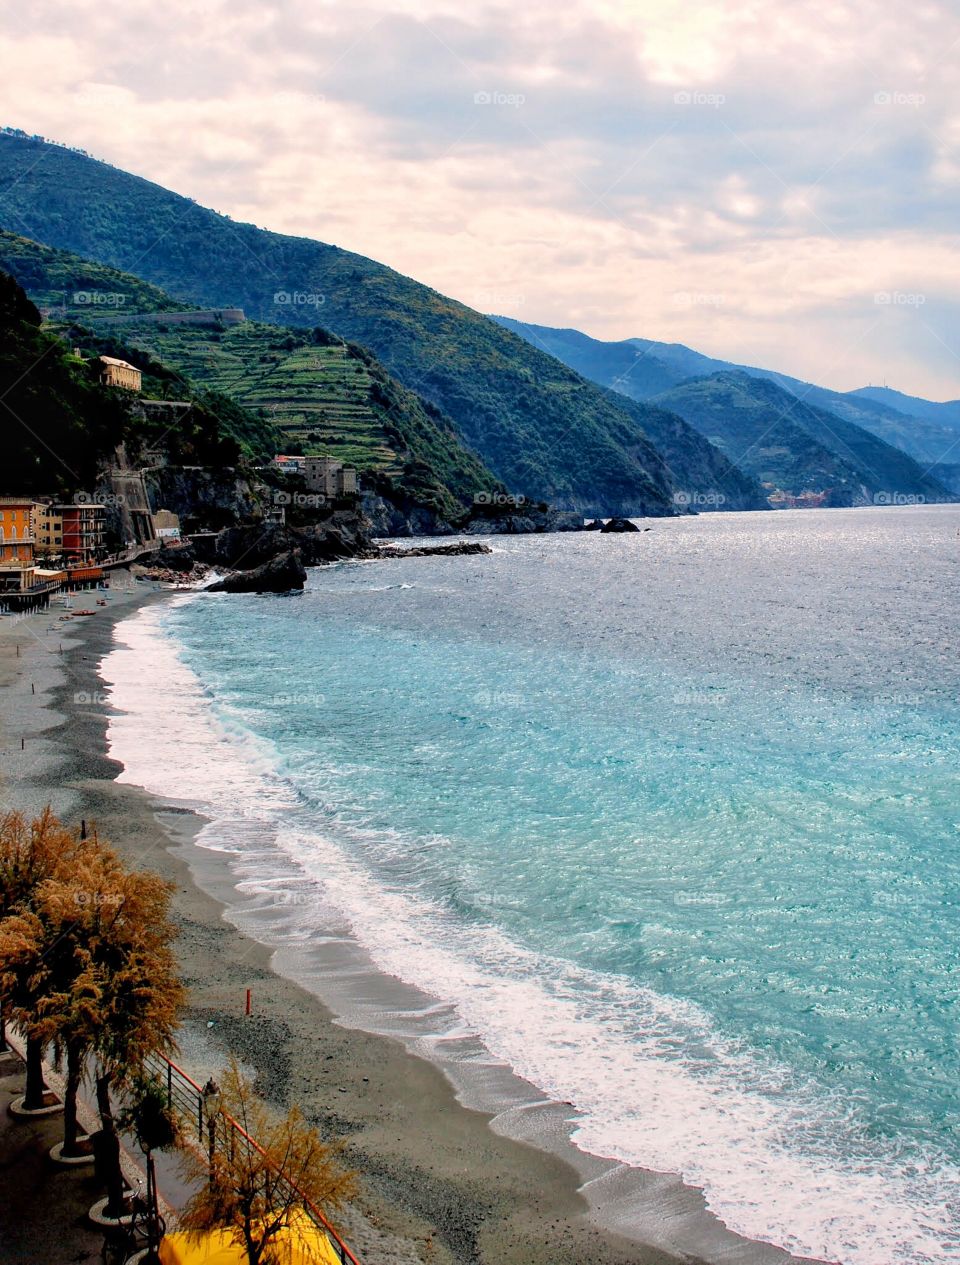 Monterroso morning . A perfectly empty shoreline early in the morning along the Cinque Terre